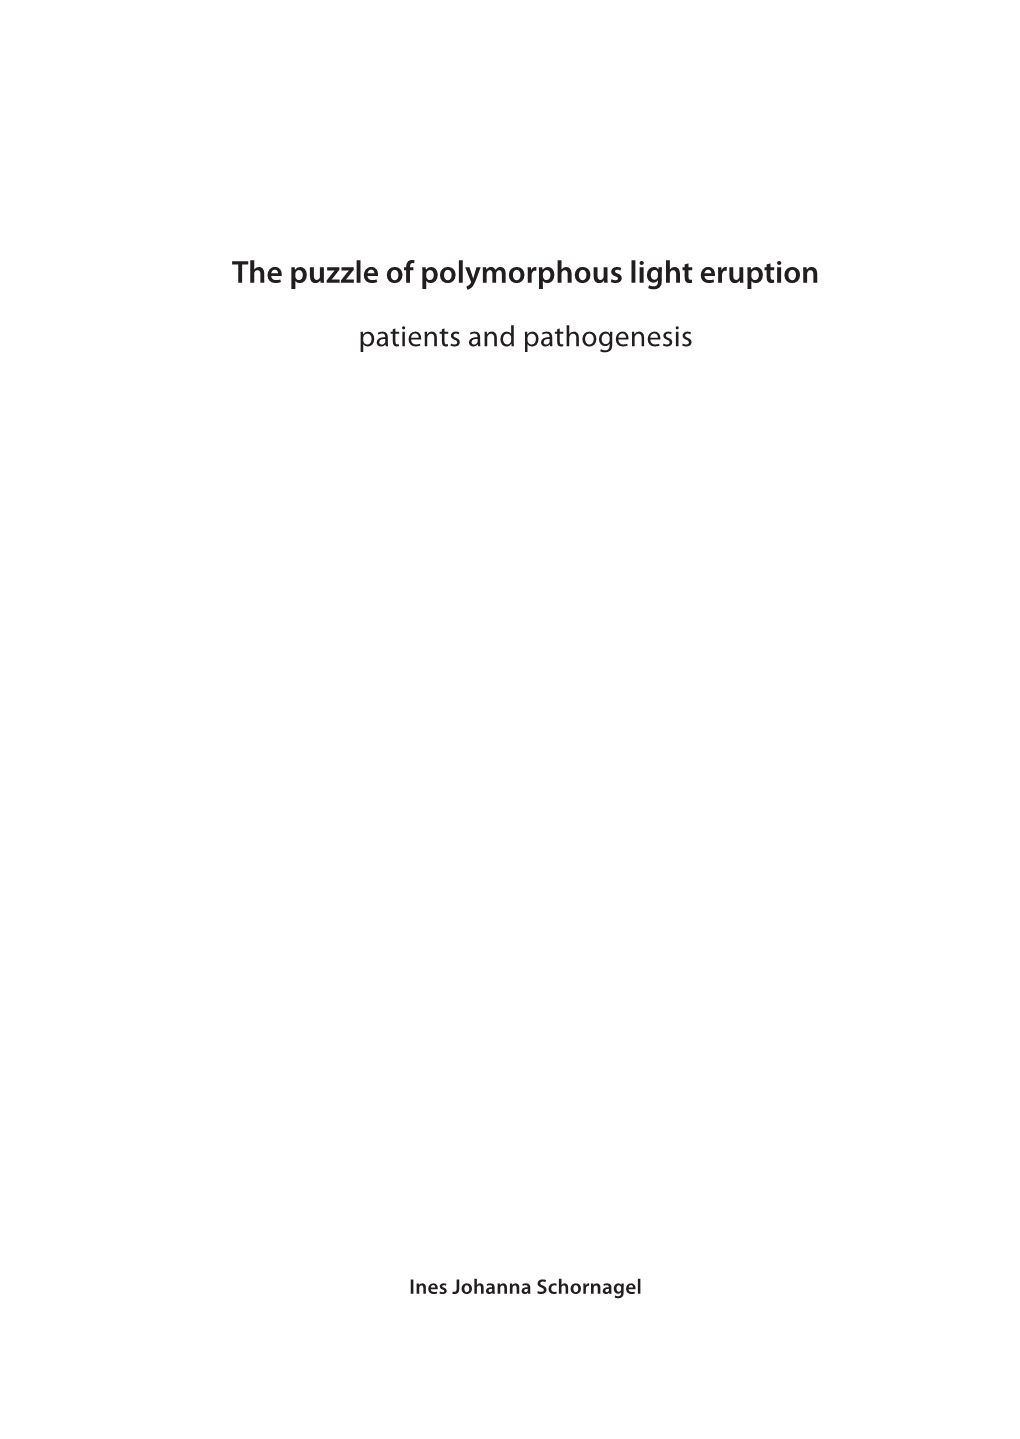 The Puzzle of Polymorphous Light Eruption